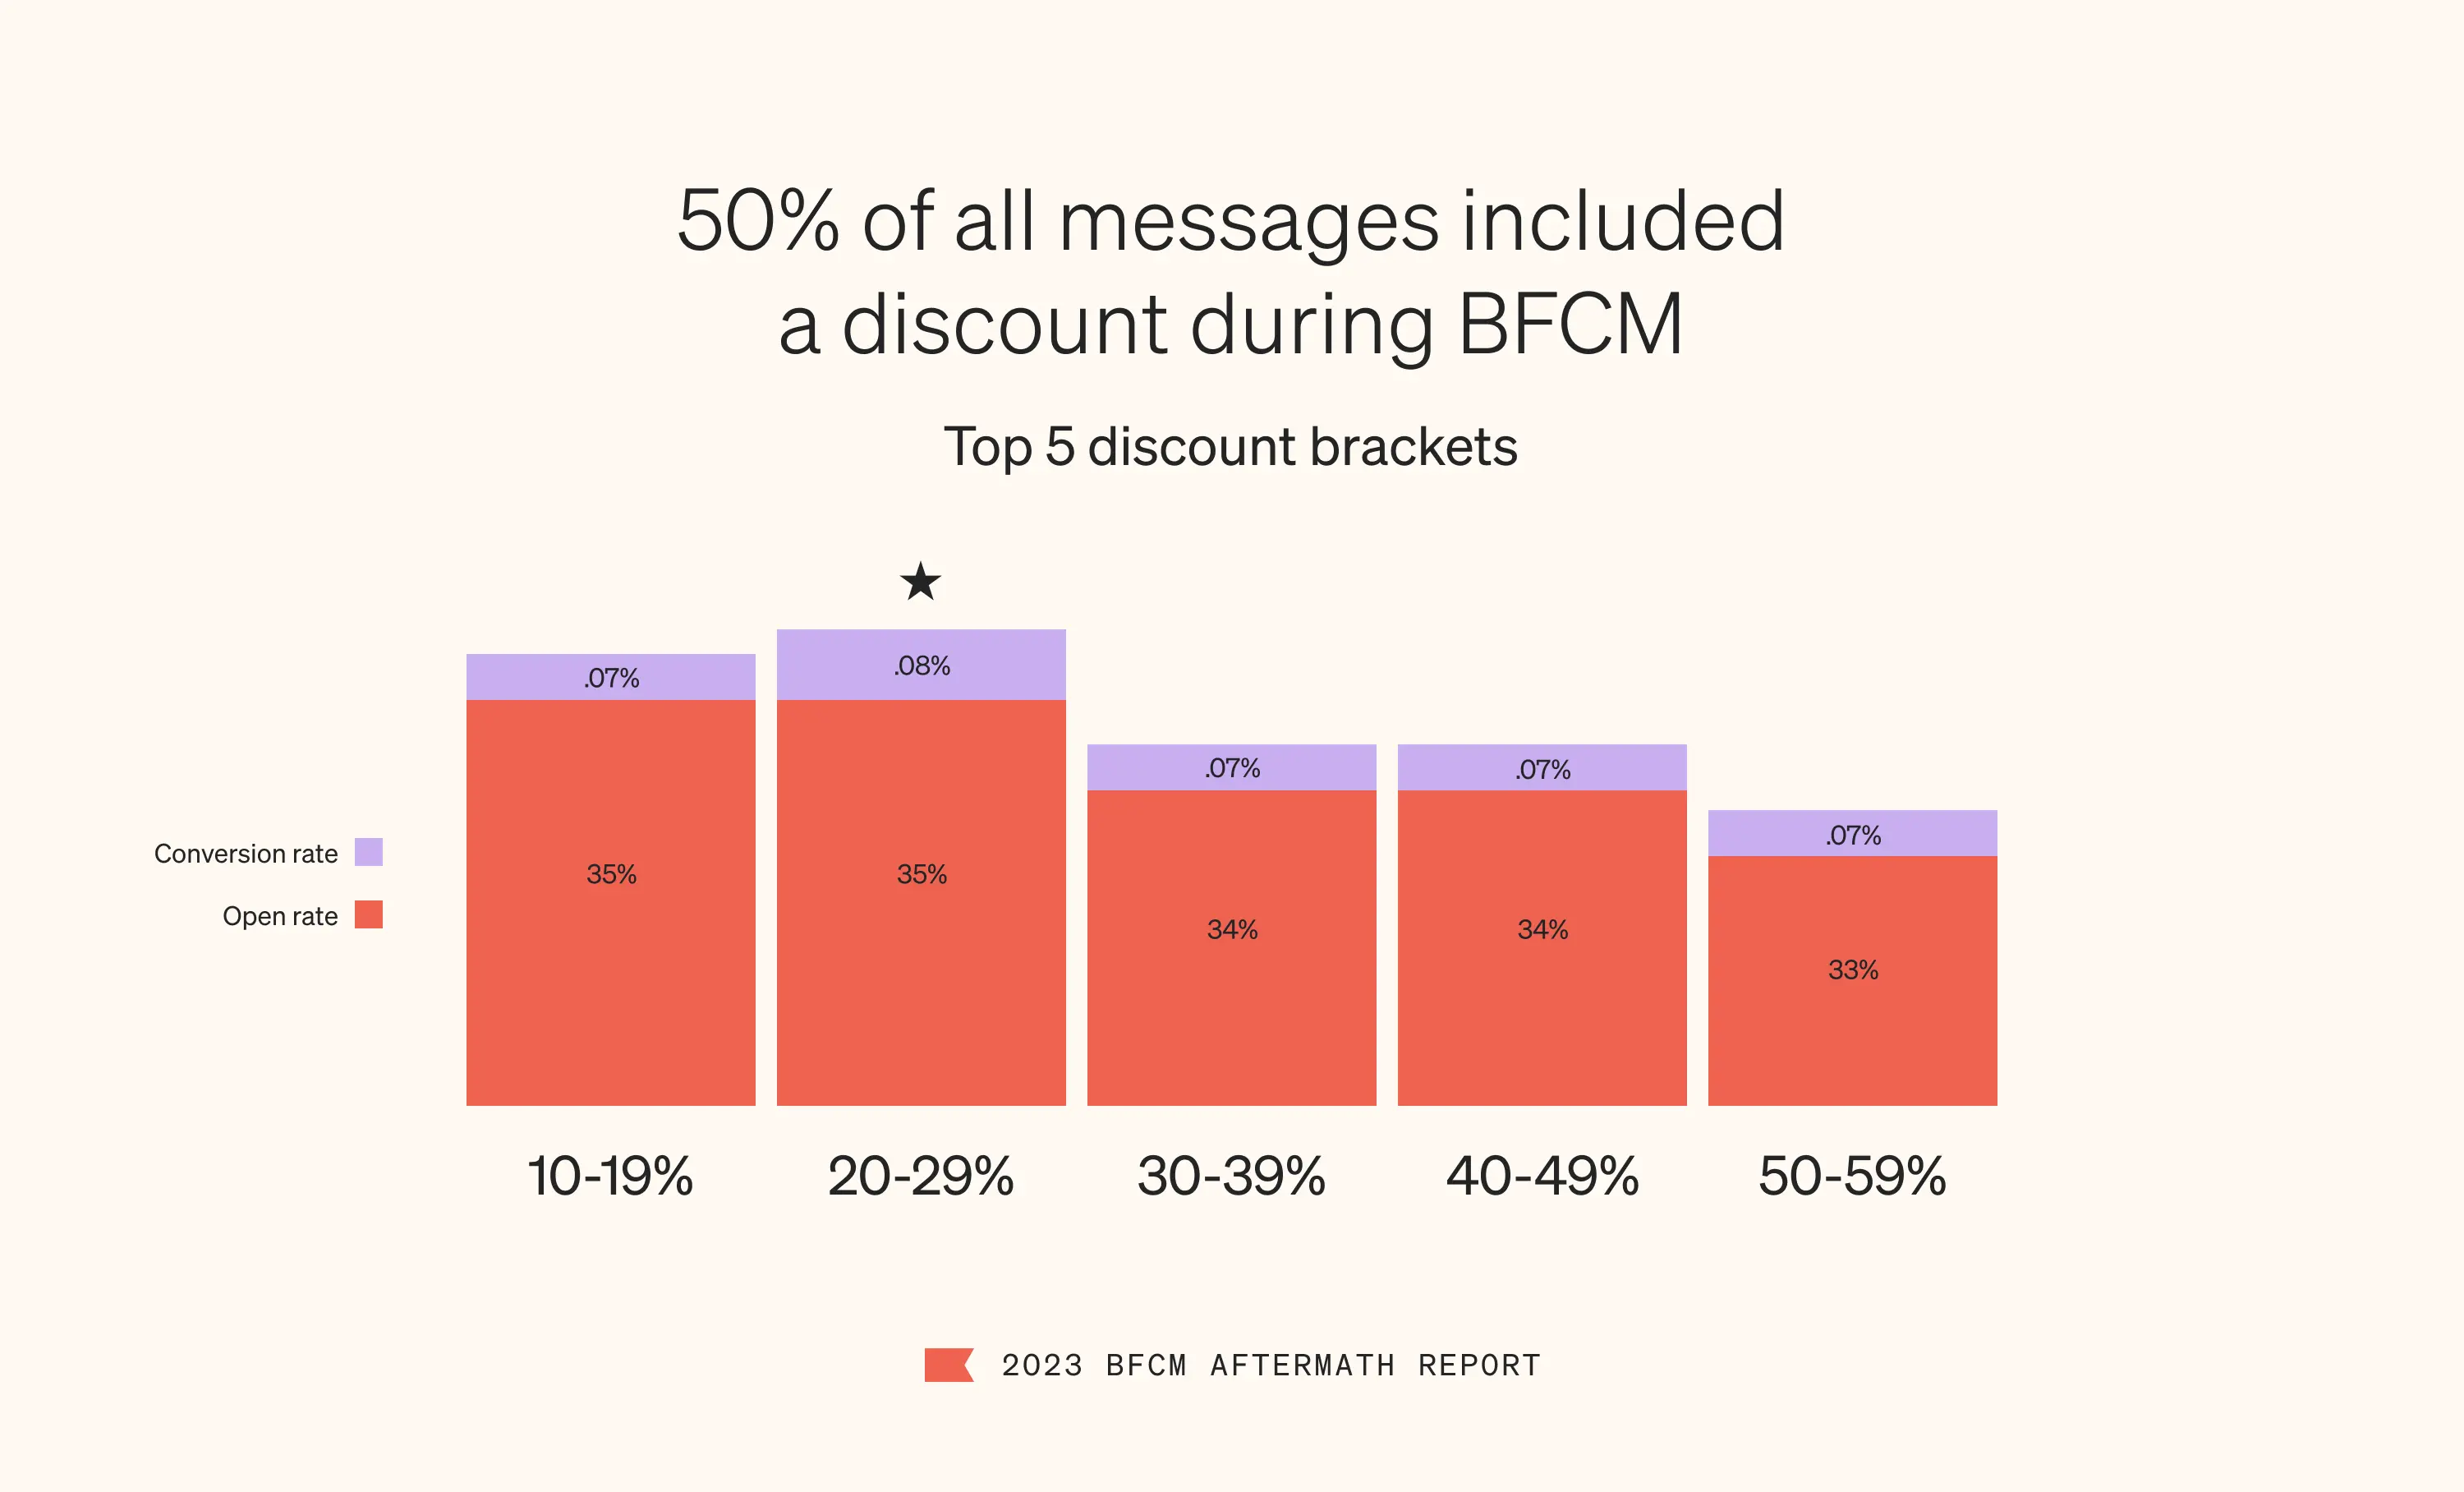 In a color scheme of lavender and poppy bars and black font on a cotton background, image visualizes discount data from BFCM for Klaviyo customers. Exactly half of all marketing messages included a discount. The best-performing discount bracket was 20-29%, with a .08% conversion rate and a 35% open rate. Other discount brackets only performed slightly worse, with a .07% conversion rate and open rates in the 33-35% range.